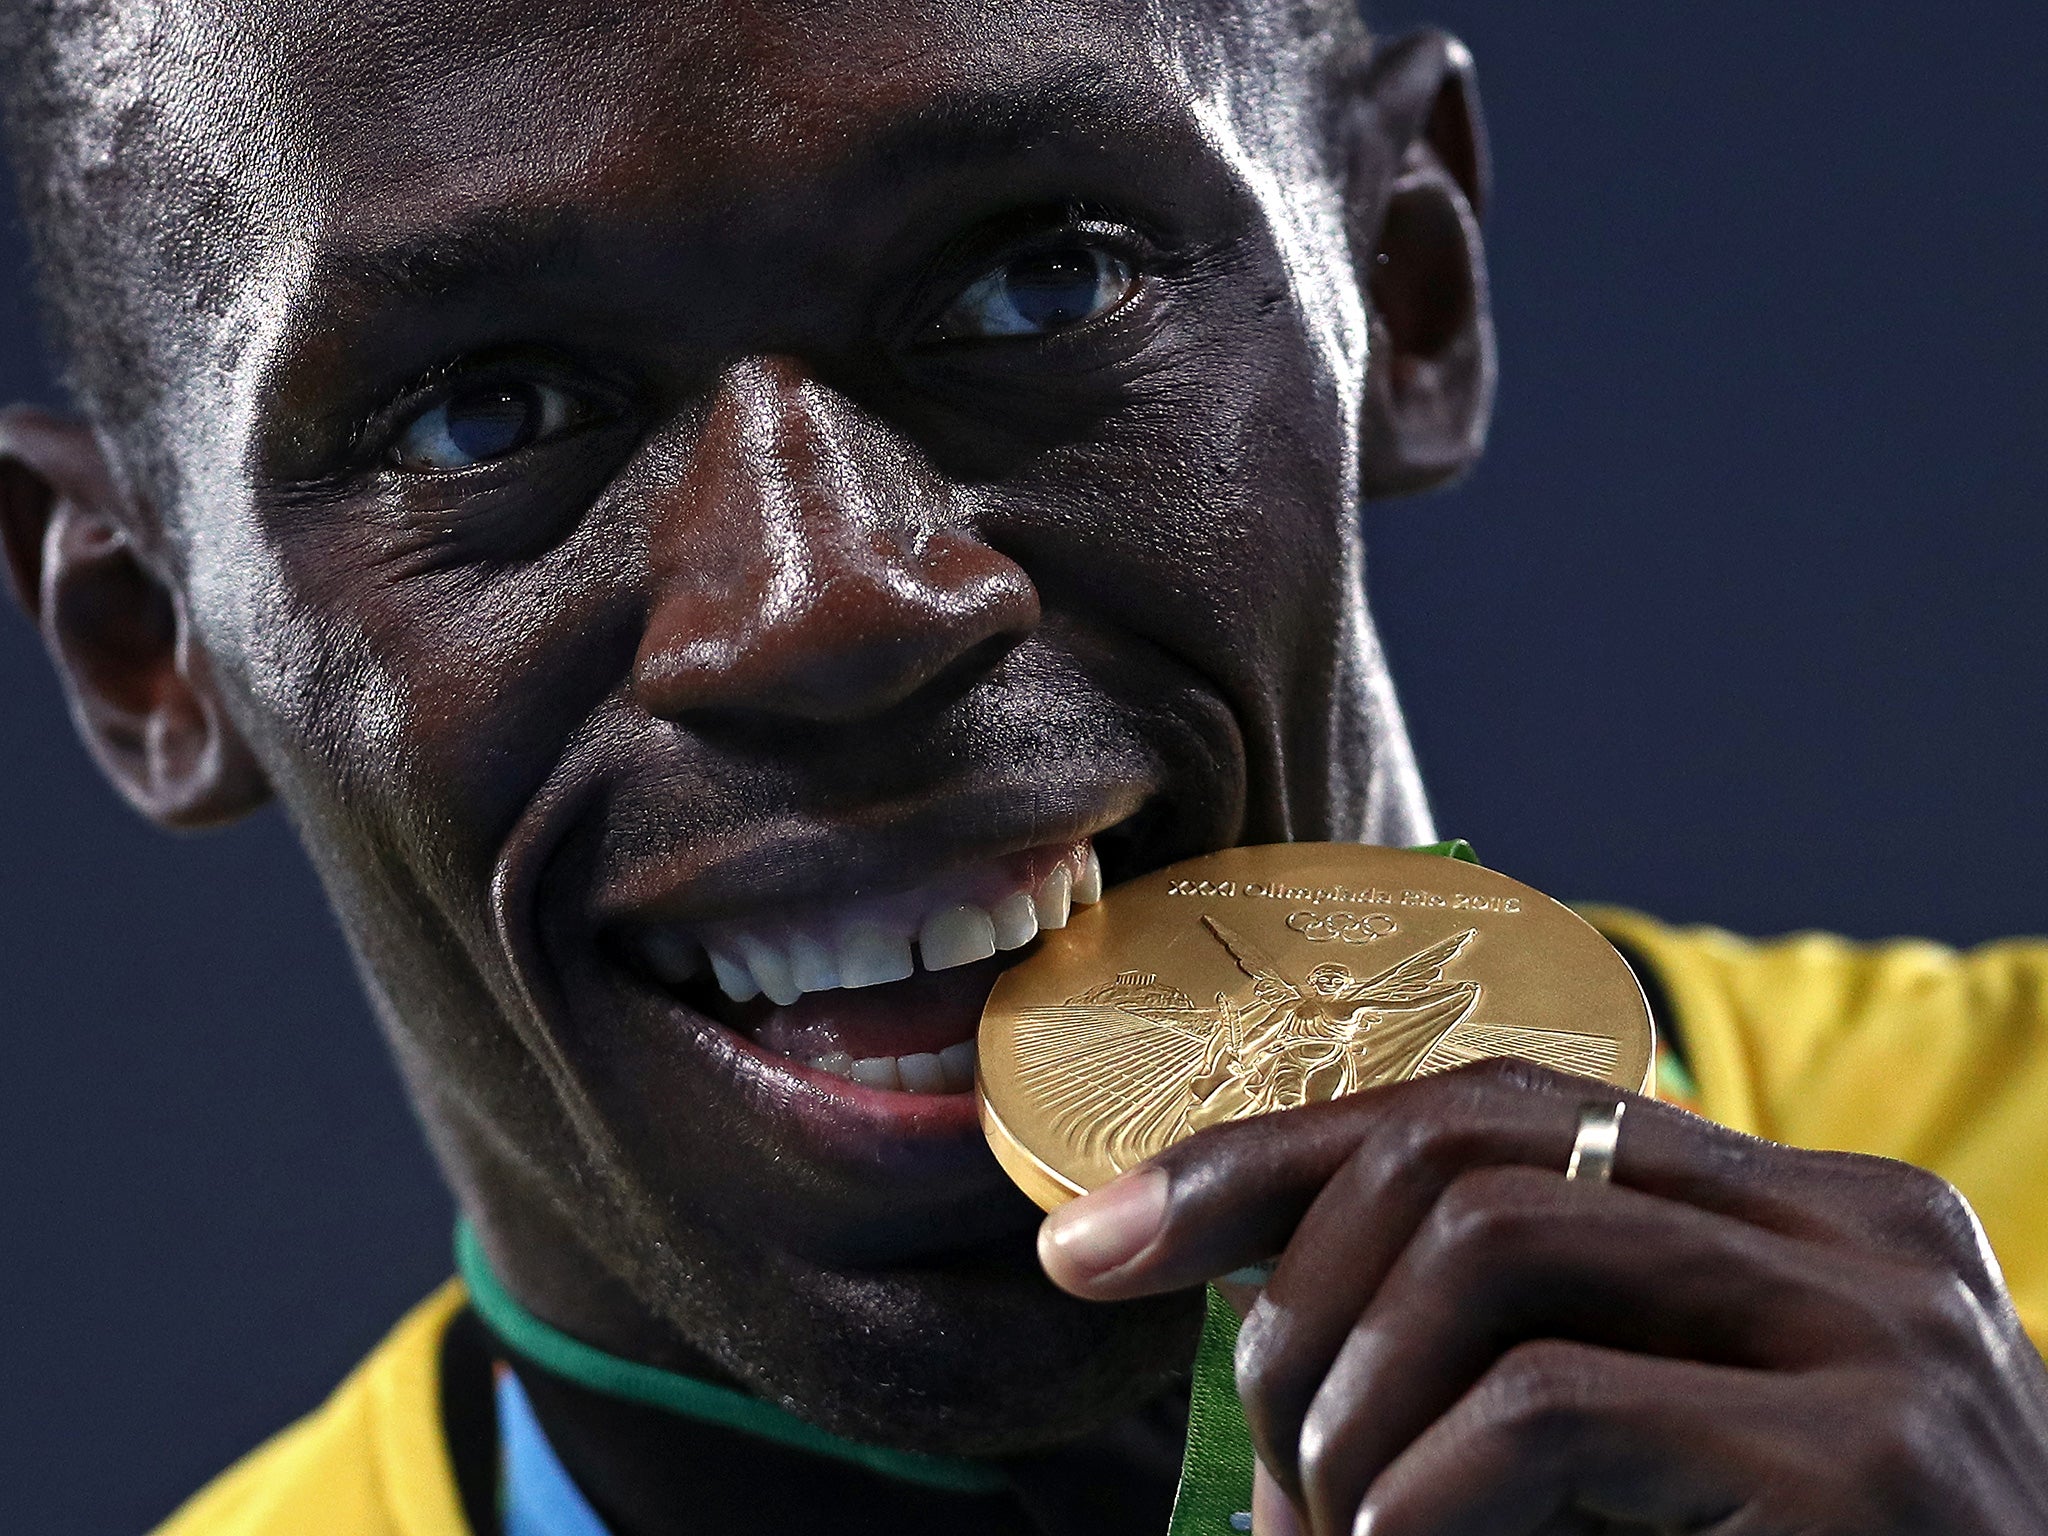 Bolt is widely regarded as history's greatest-ever sprinter